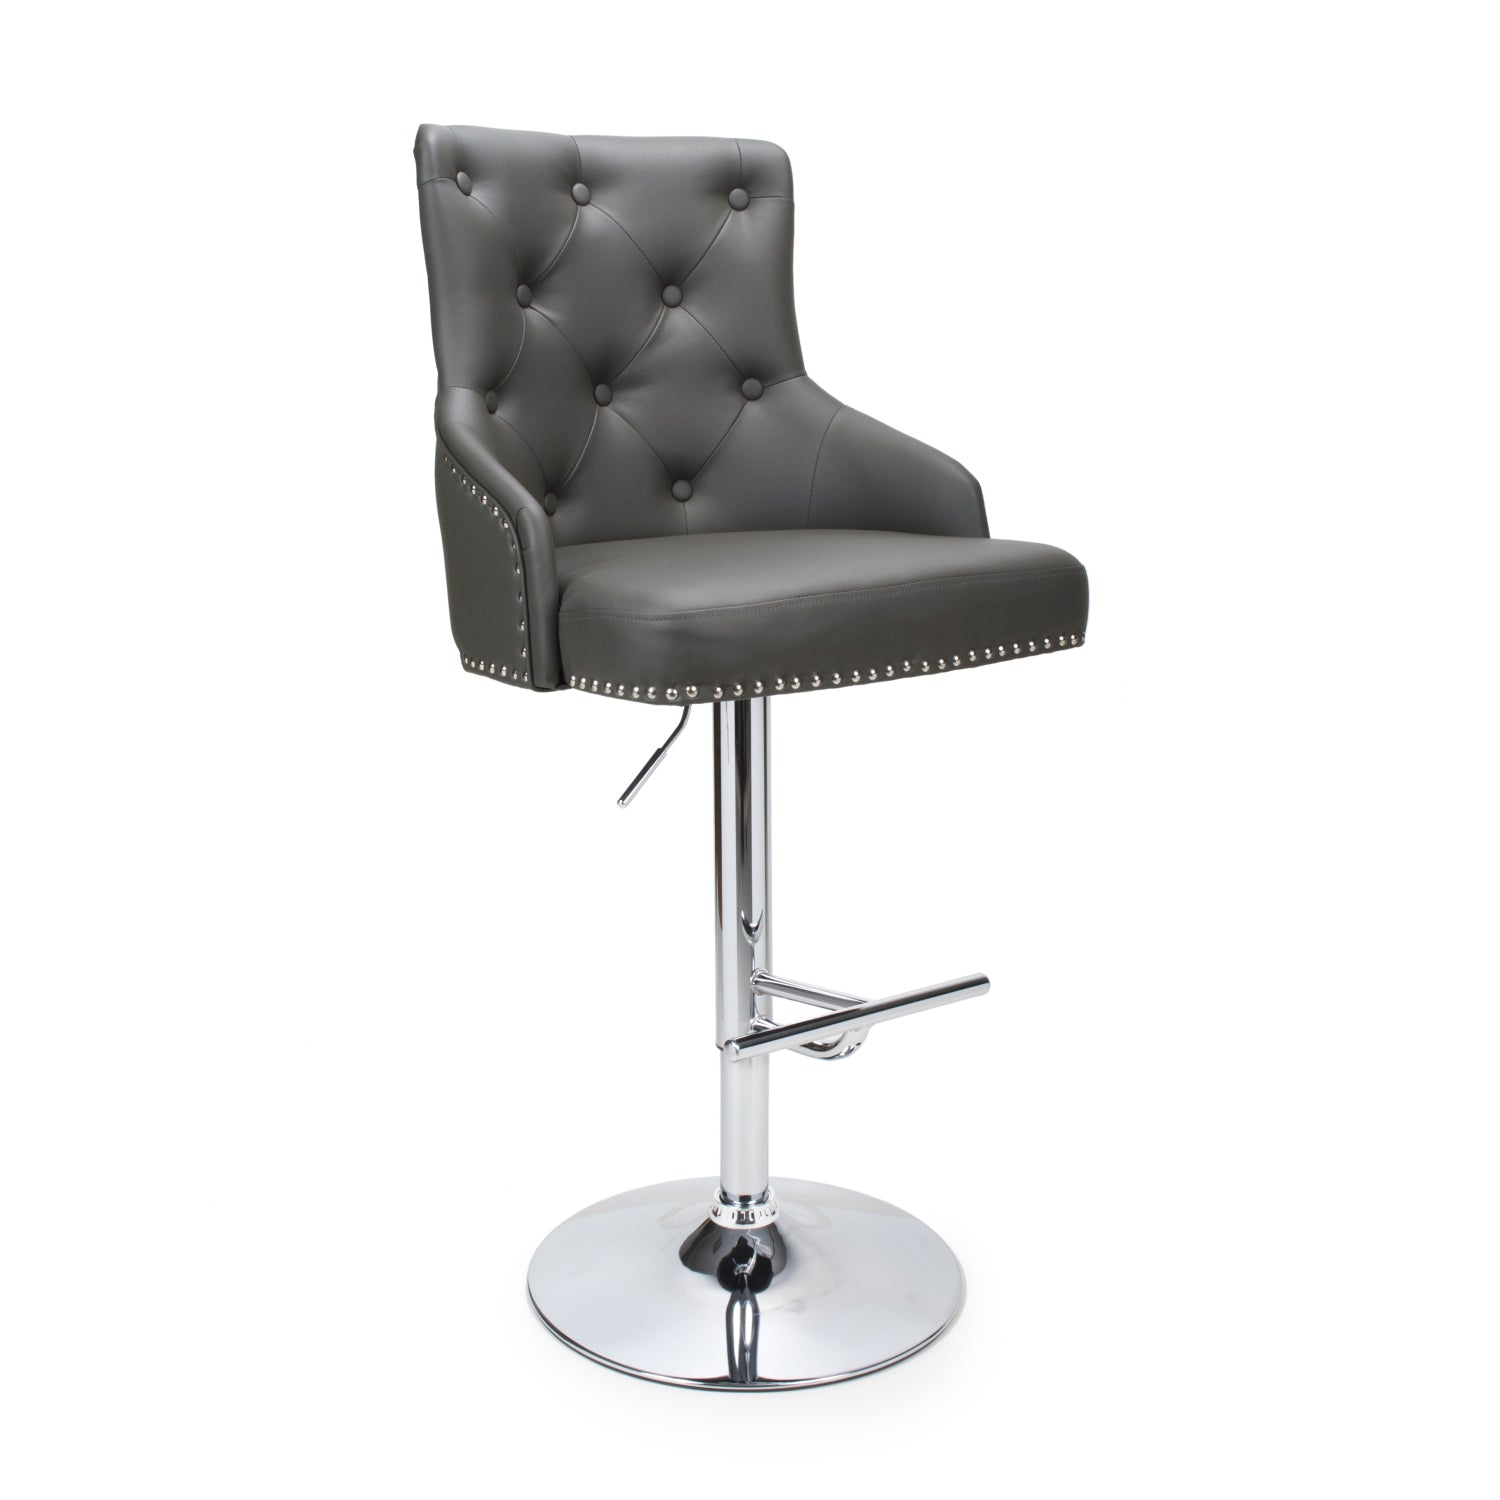 Rocco Faux Leather adjustable bar stools from Top Secret Furniture